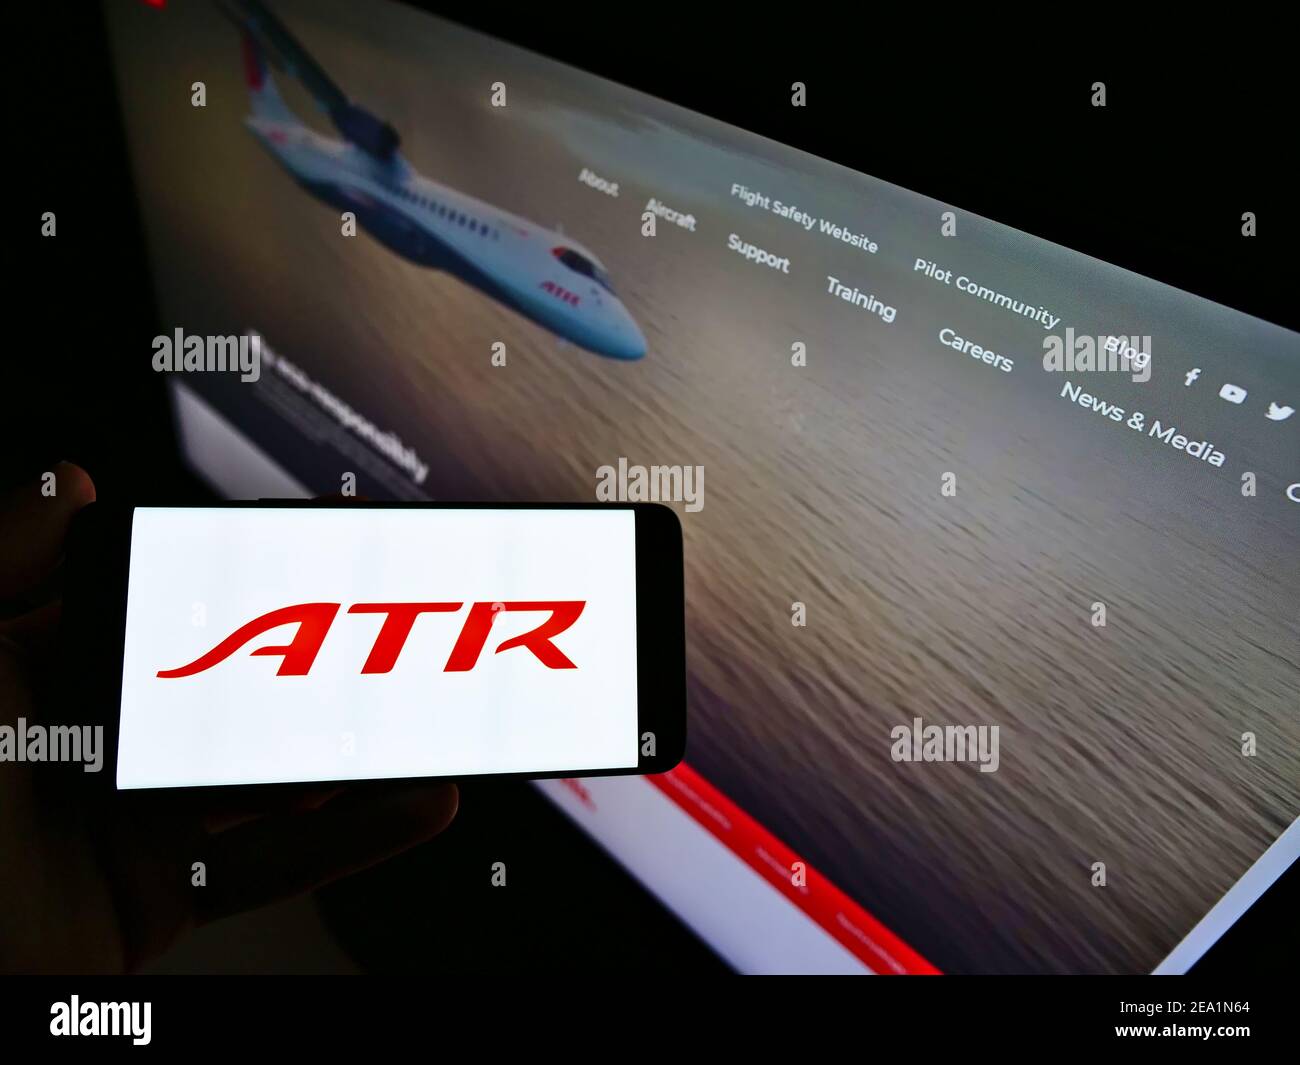 Person holding mobile phone with logo of aircraft manufacturer Avions de Transport Régional (ATR) on screen with web page. Focus on cellphone display. Stock Photo